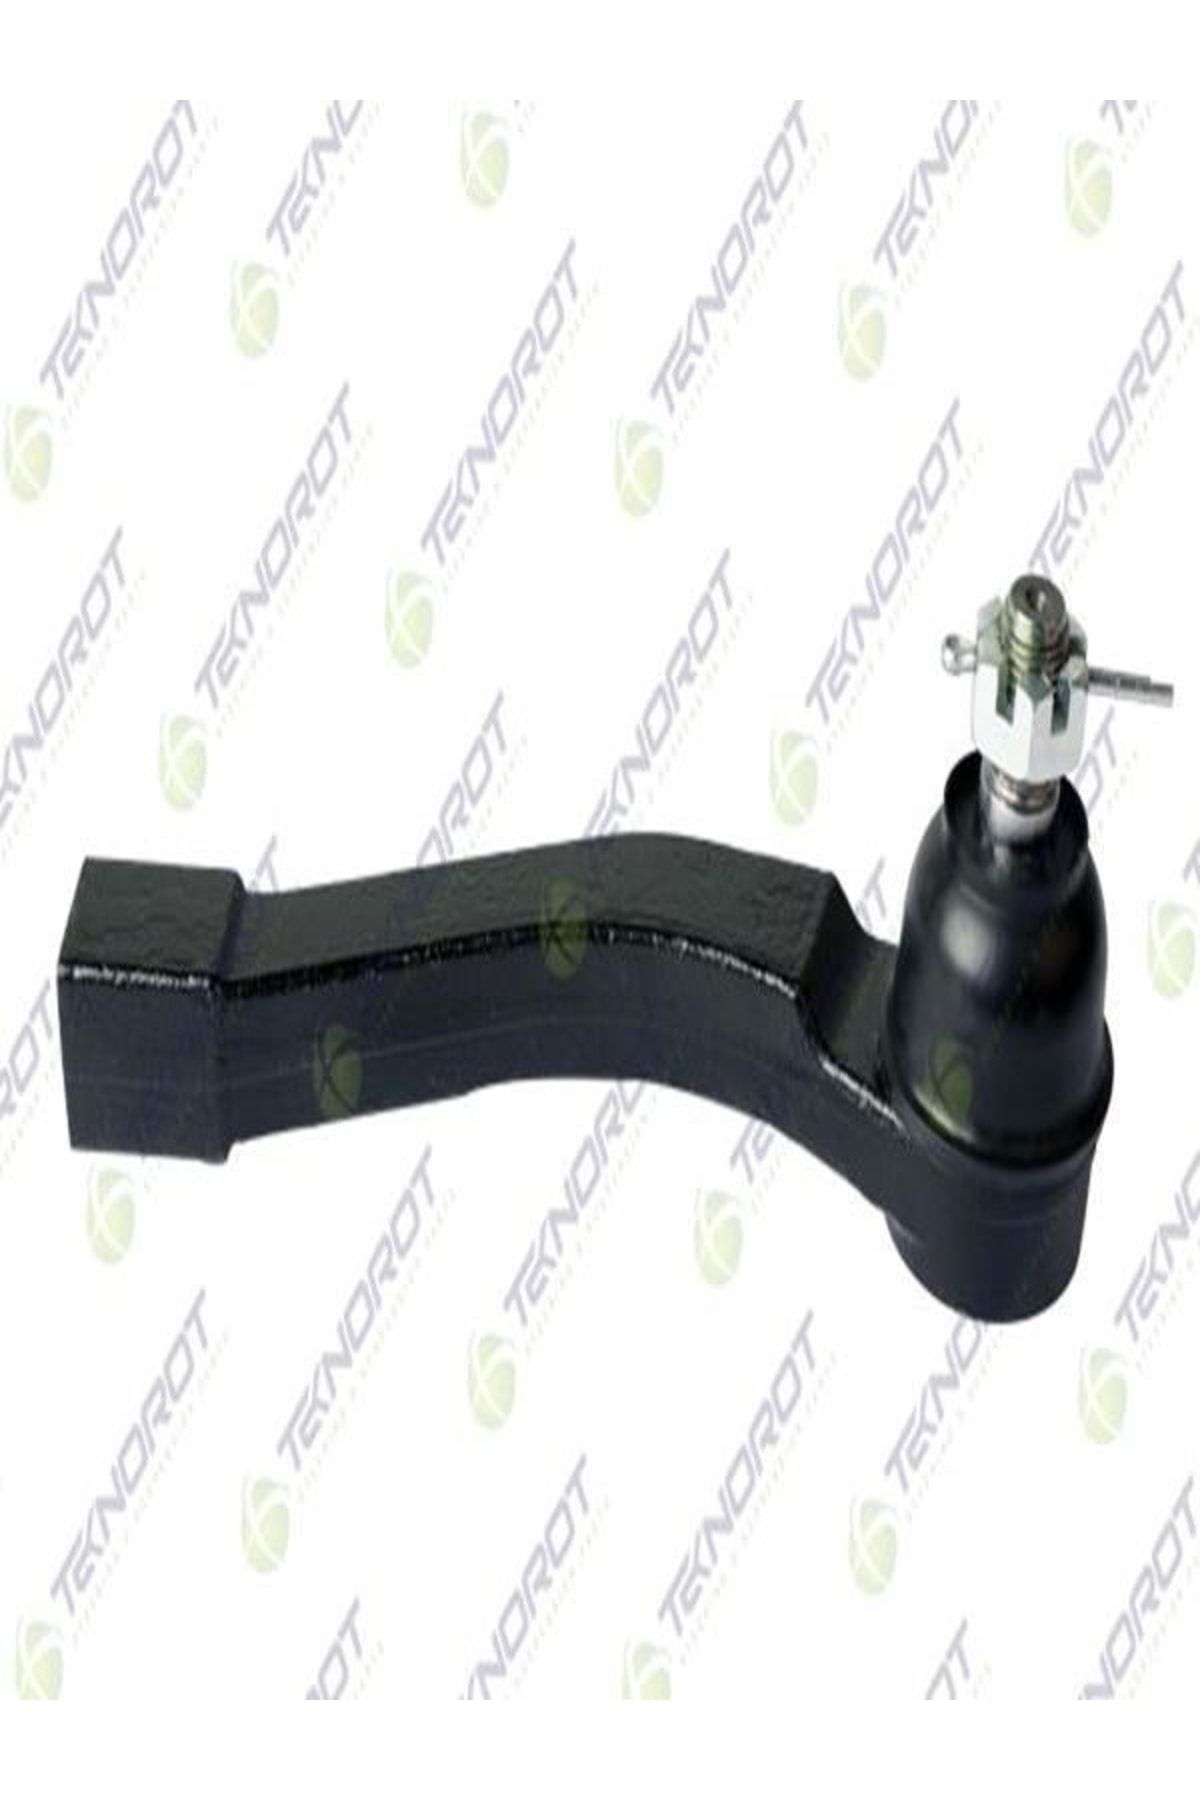 Teknorot Sy-121 Rotbasi On Sag Ssangyong Actyon Rexton 2006-2012 4666009013 Sy121 (WY865362)